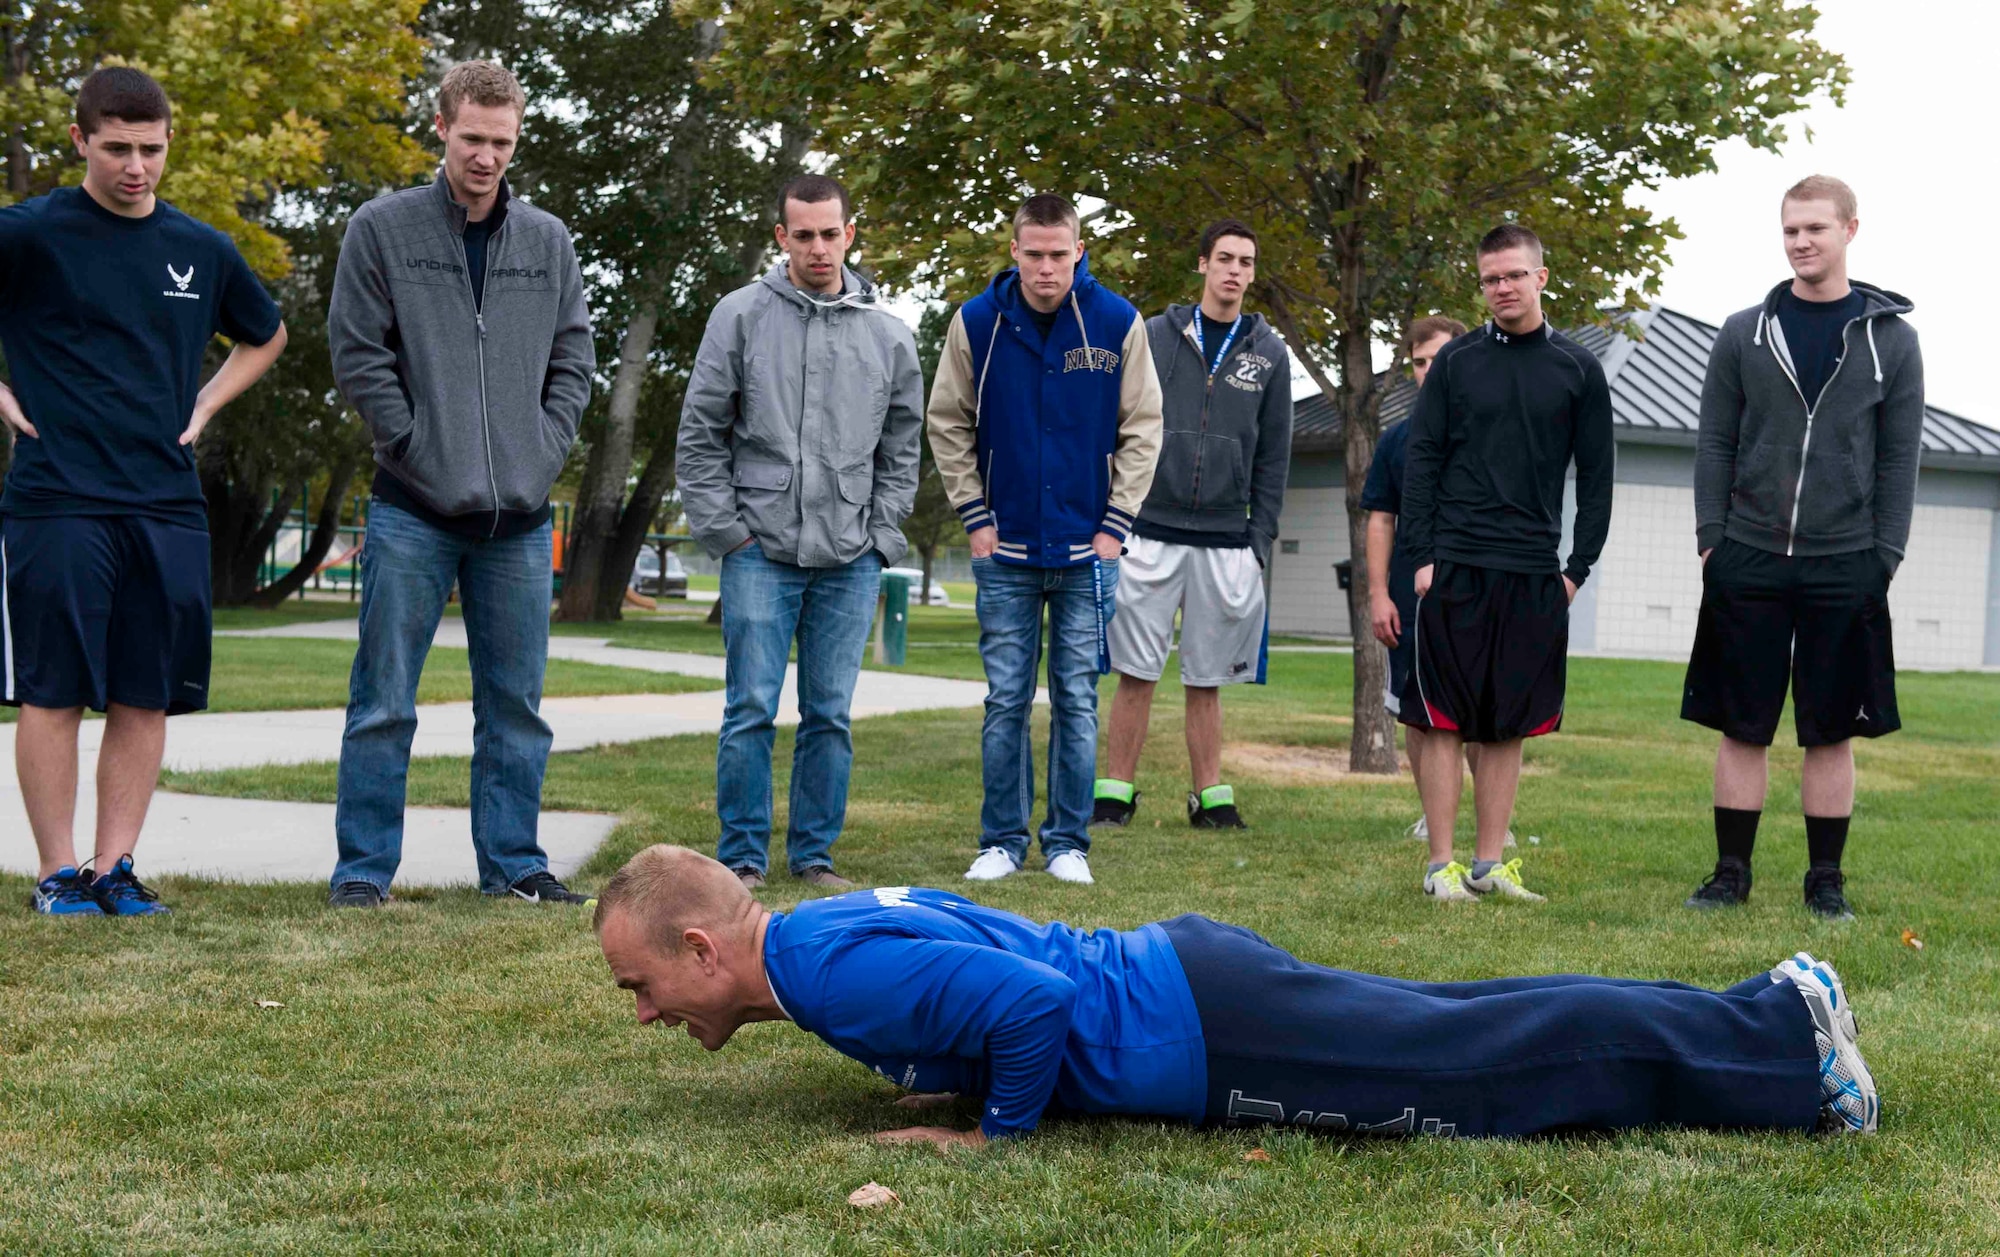 Tech. Sgt. Michael Lundell, 368th Recruiting Squadron recruiter, teaches his delayed entry program candidates how to properly do a push up in preparation for Basic Military Training in West Valley, Utah, Oct. 3, 2013. Lundell grew up in Utah Co. and joined the Air Force in August 2003 as an aircrew life support airman. He was selected for recruiting and lives back in Utah for a four year assignment. (U.S. Air Force photo by Senior Airman Tiffany DeNault)


